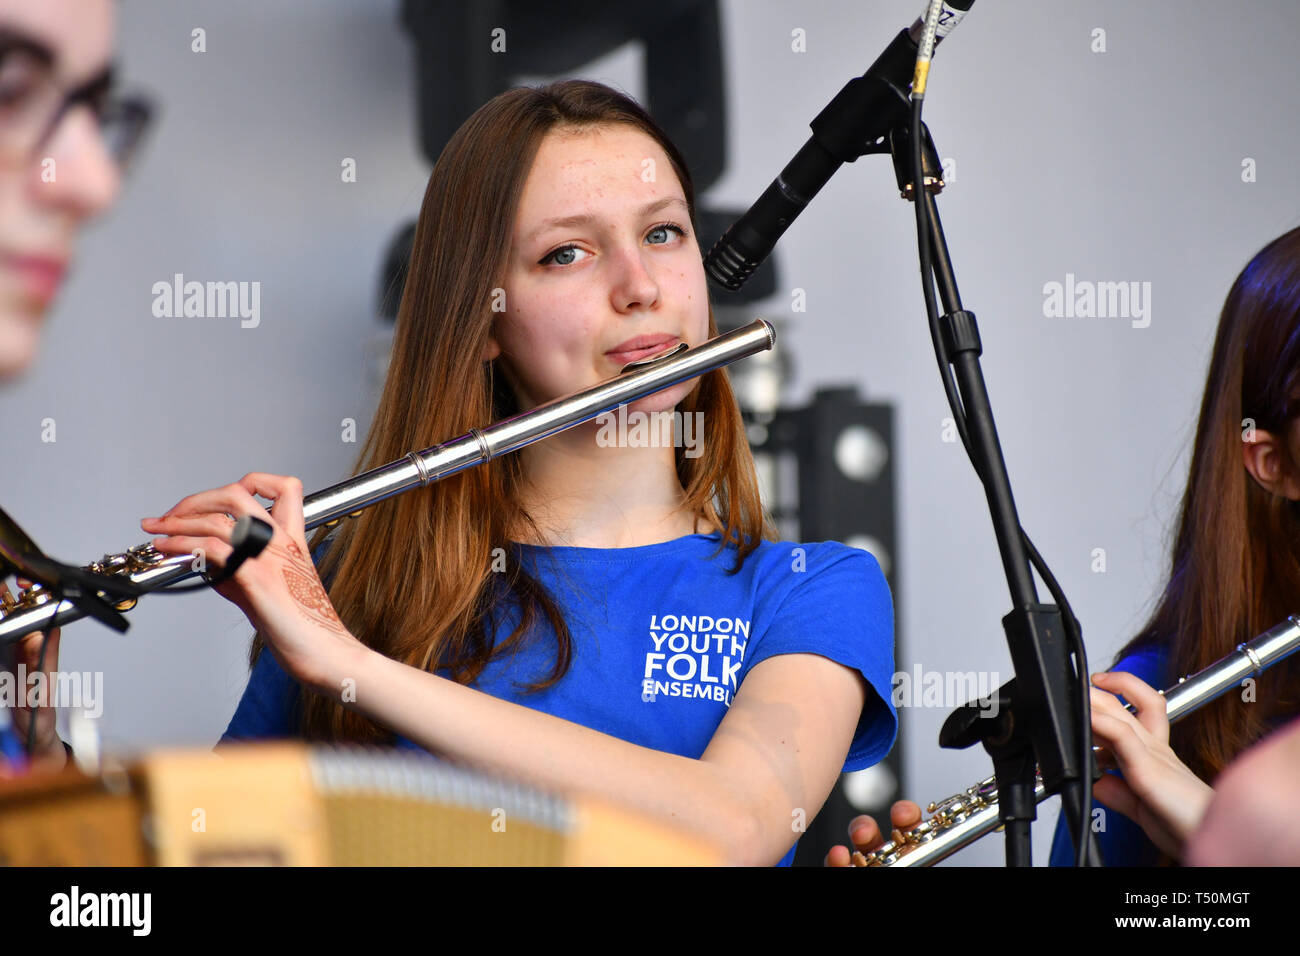 London, UK. 20th April, 2019.London Youth Folk Ensemble attend the Feast of St George to celebrate English culture with music and English food stalls in Trafalgar Square on 20 April 2019, London, UK. Credit: Picture Capital/Alamy Live News Stock Photo